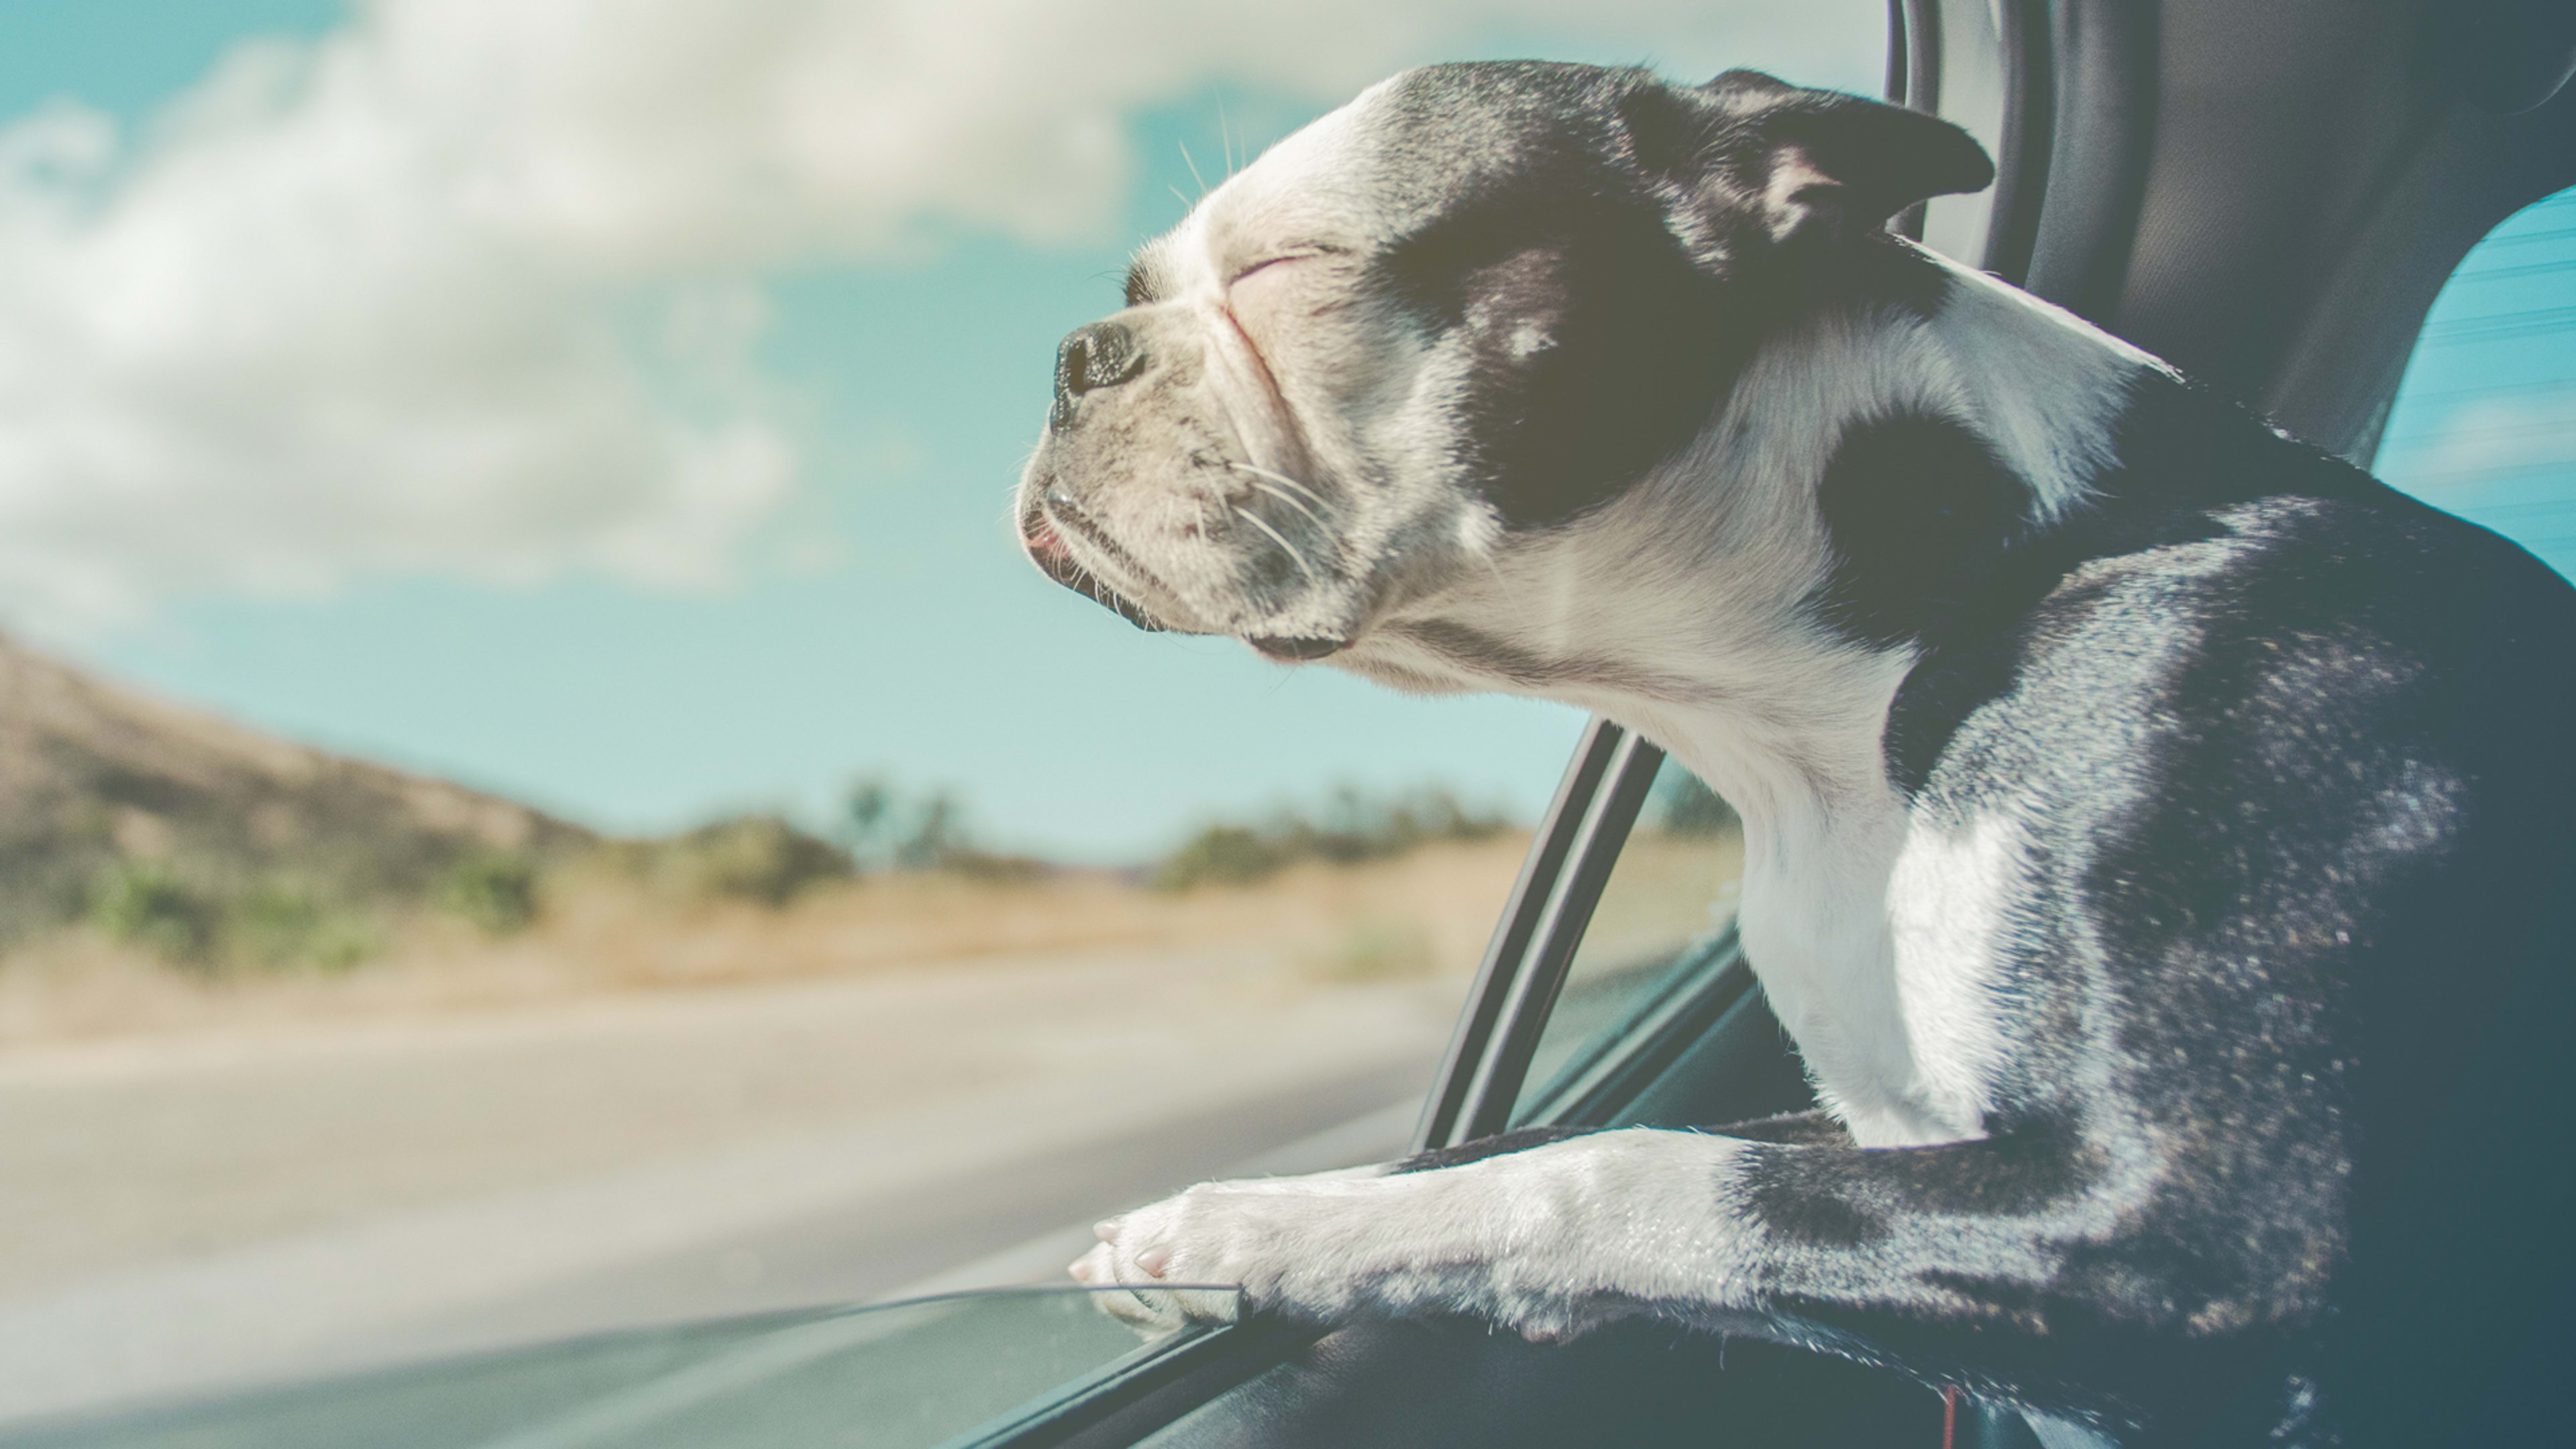 Waze teams up with Best Friends Animal Society to make pet adoption easier